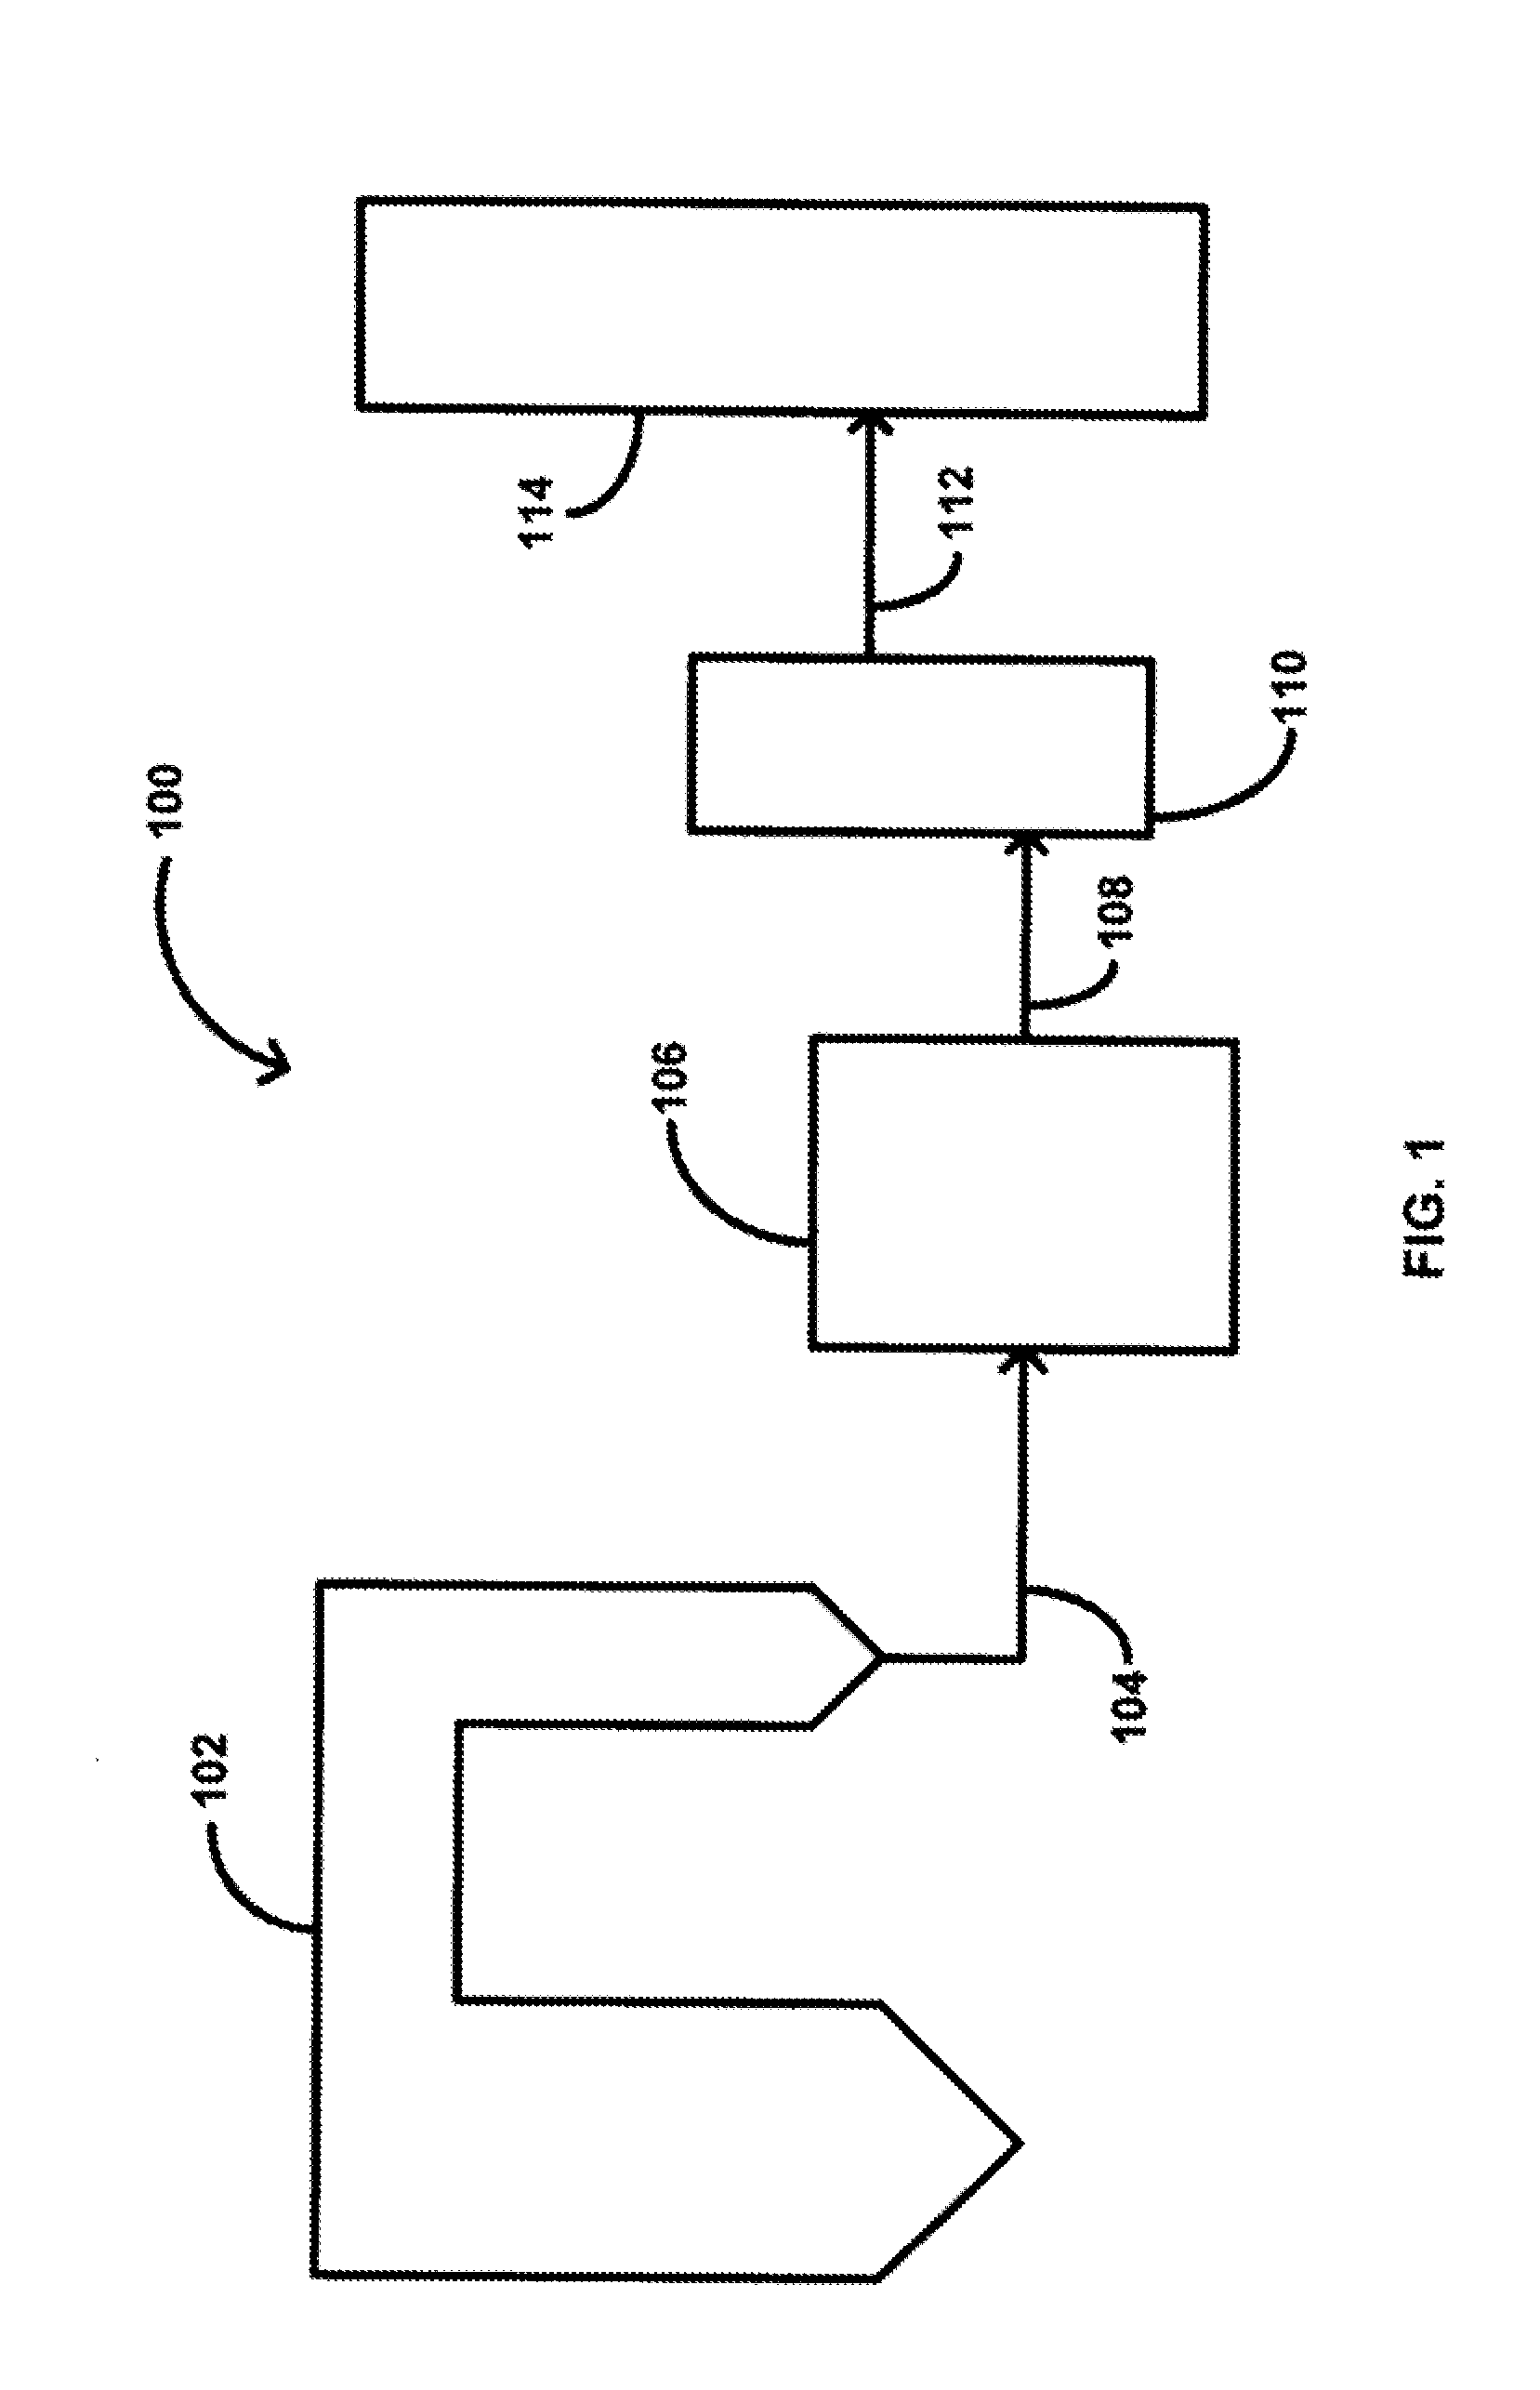 Sorbent Filter for the Removal of Vapor Phase Contaminants